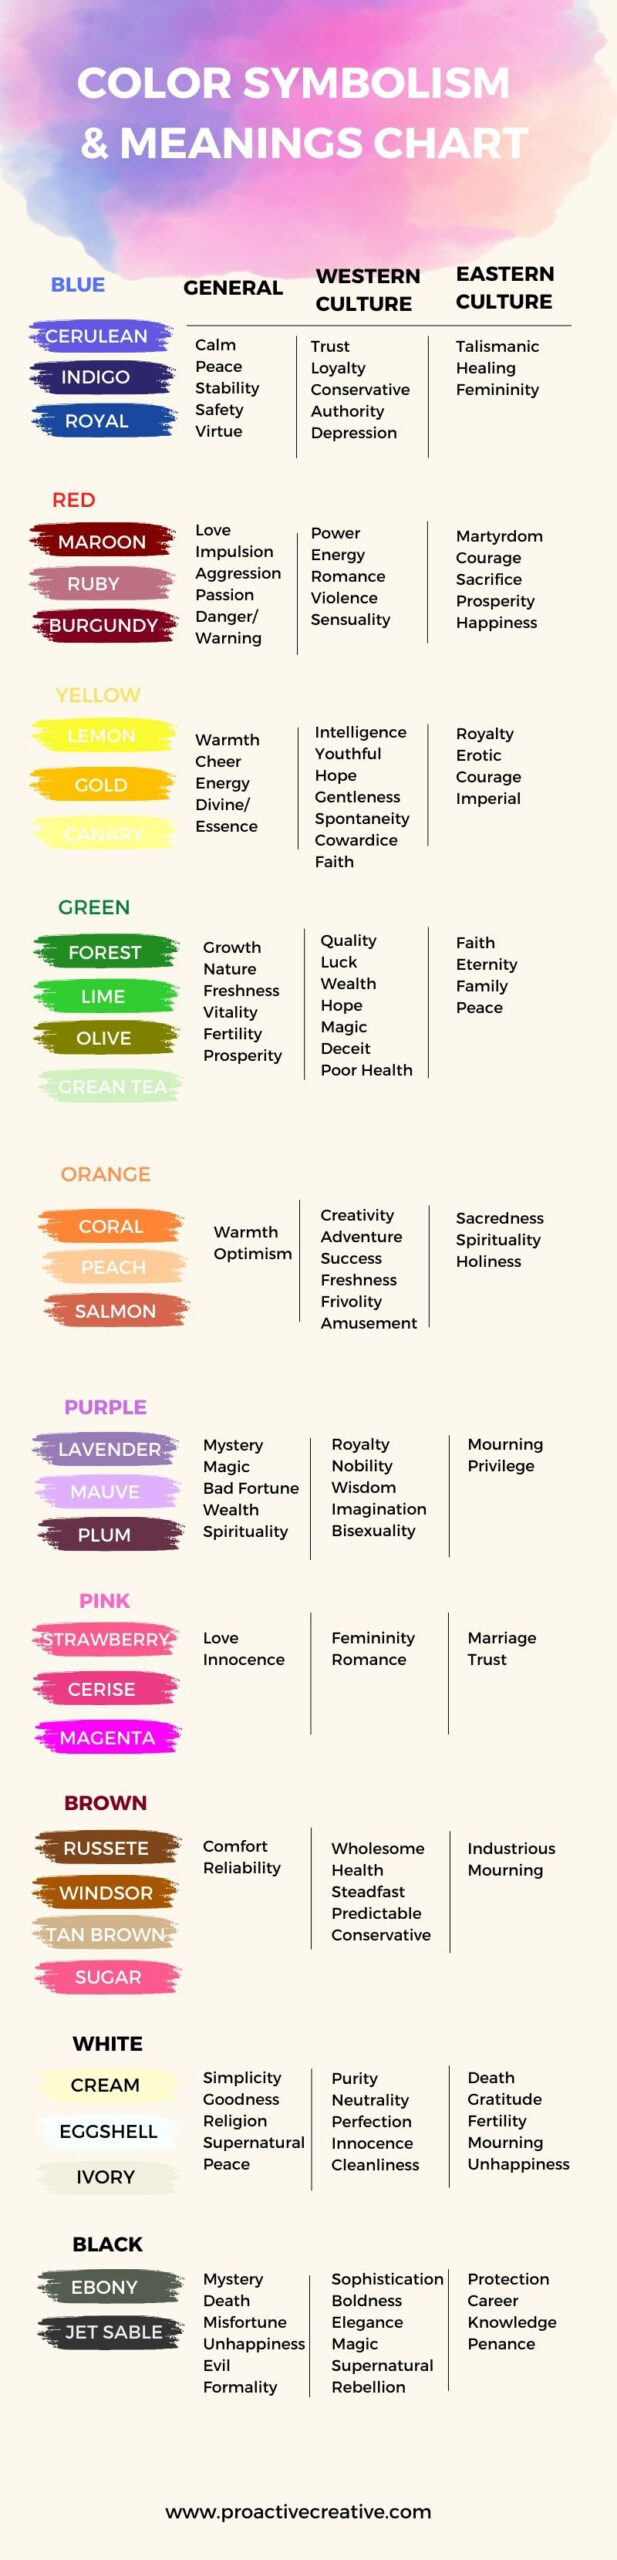 Colors symbolism chart and meanings. Over centuries, people have attributed subjective meanings to colors based on how humans respond to them. We either have a

biological reaction (e.g., feeling fearful or sad in the presence of black)

cultural response (e.g., red evokes a sense of prosperity in many Asian cultures)

personal experience based on memories or preference

Sources differ somewhat on the absolute categorization of colors, yet this chart represents a good framework. The general meanings are universal associations. Those under western (e.g., USA, South America, Europe, etc.) and eastern (e.g., Middle East, India, China, Japan, etc.) cultures tend to be bound to geography: